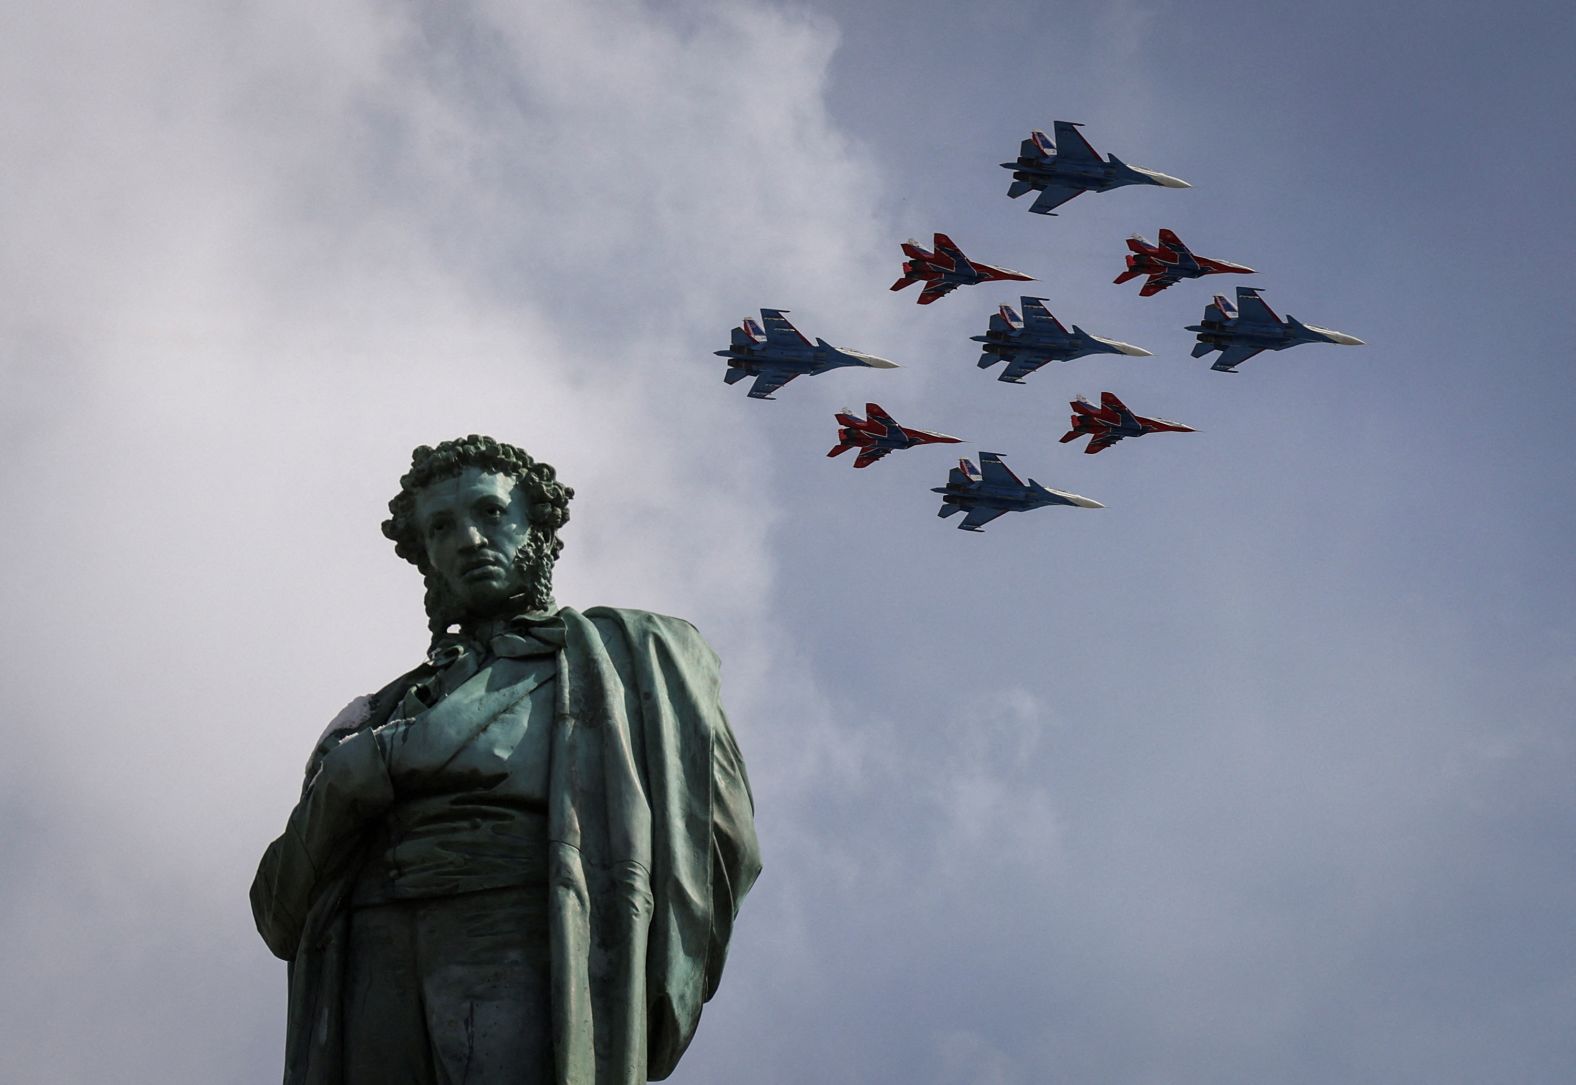 The Russian Knights aerobatic team flies over a monument of Russian poet Alexander Pushkin during a Victory Day parade in Moscow on Thursday, May 9. Victory Day marks the anniversary of the victory over Nazi Germany in World War II.